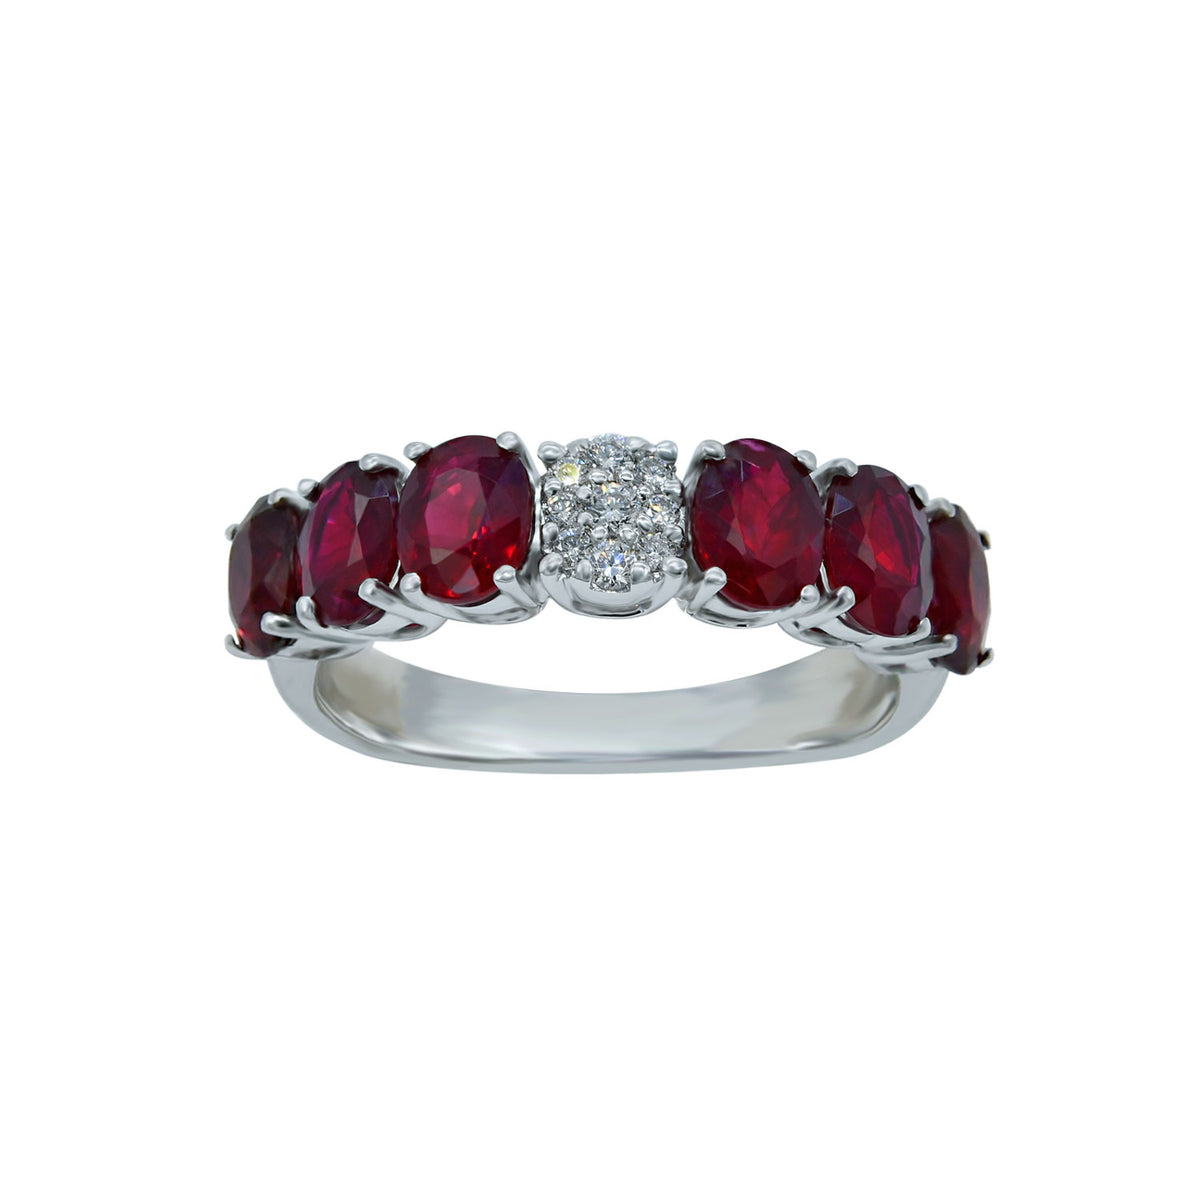 Ruby Band. Ruby and diamond ring. Oval rubies ring.